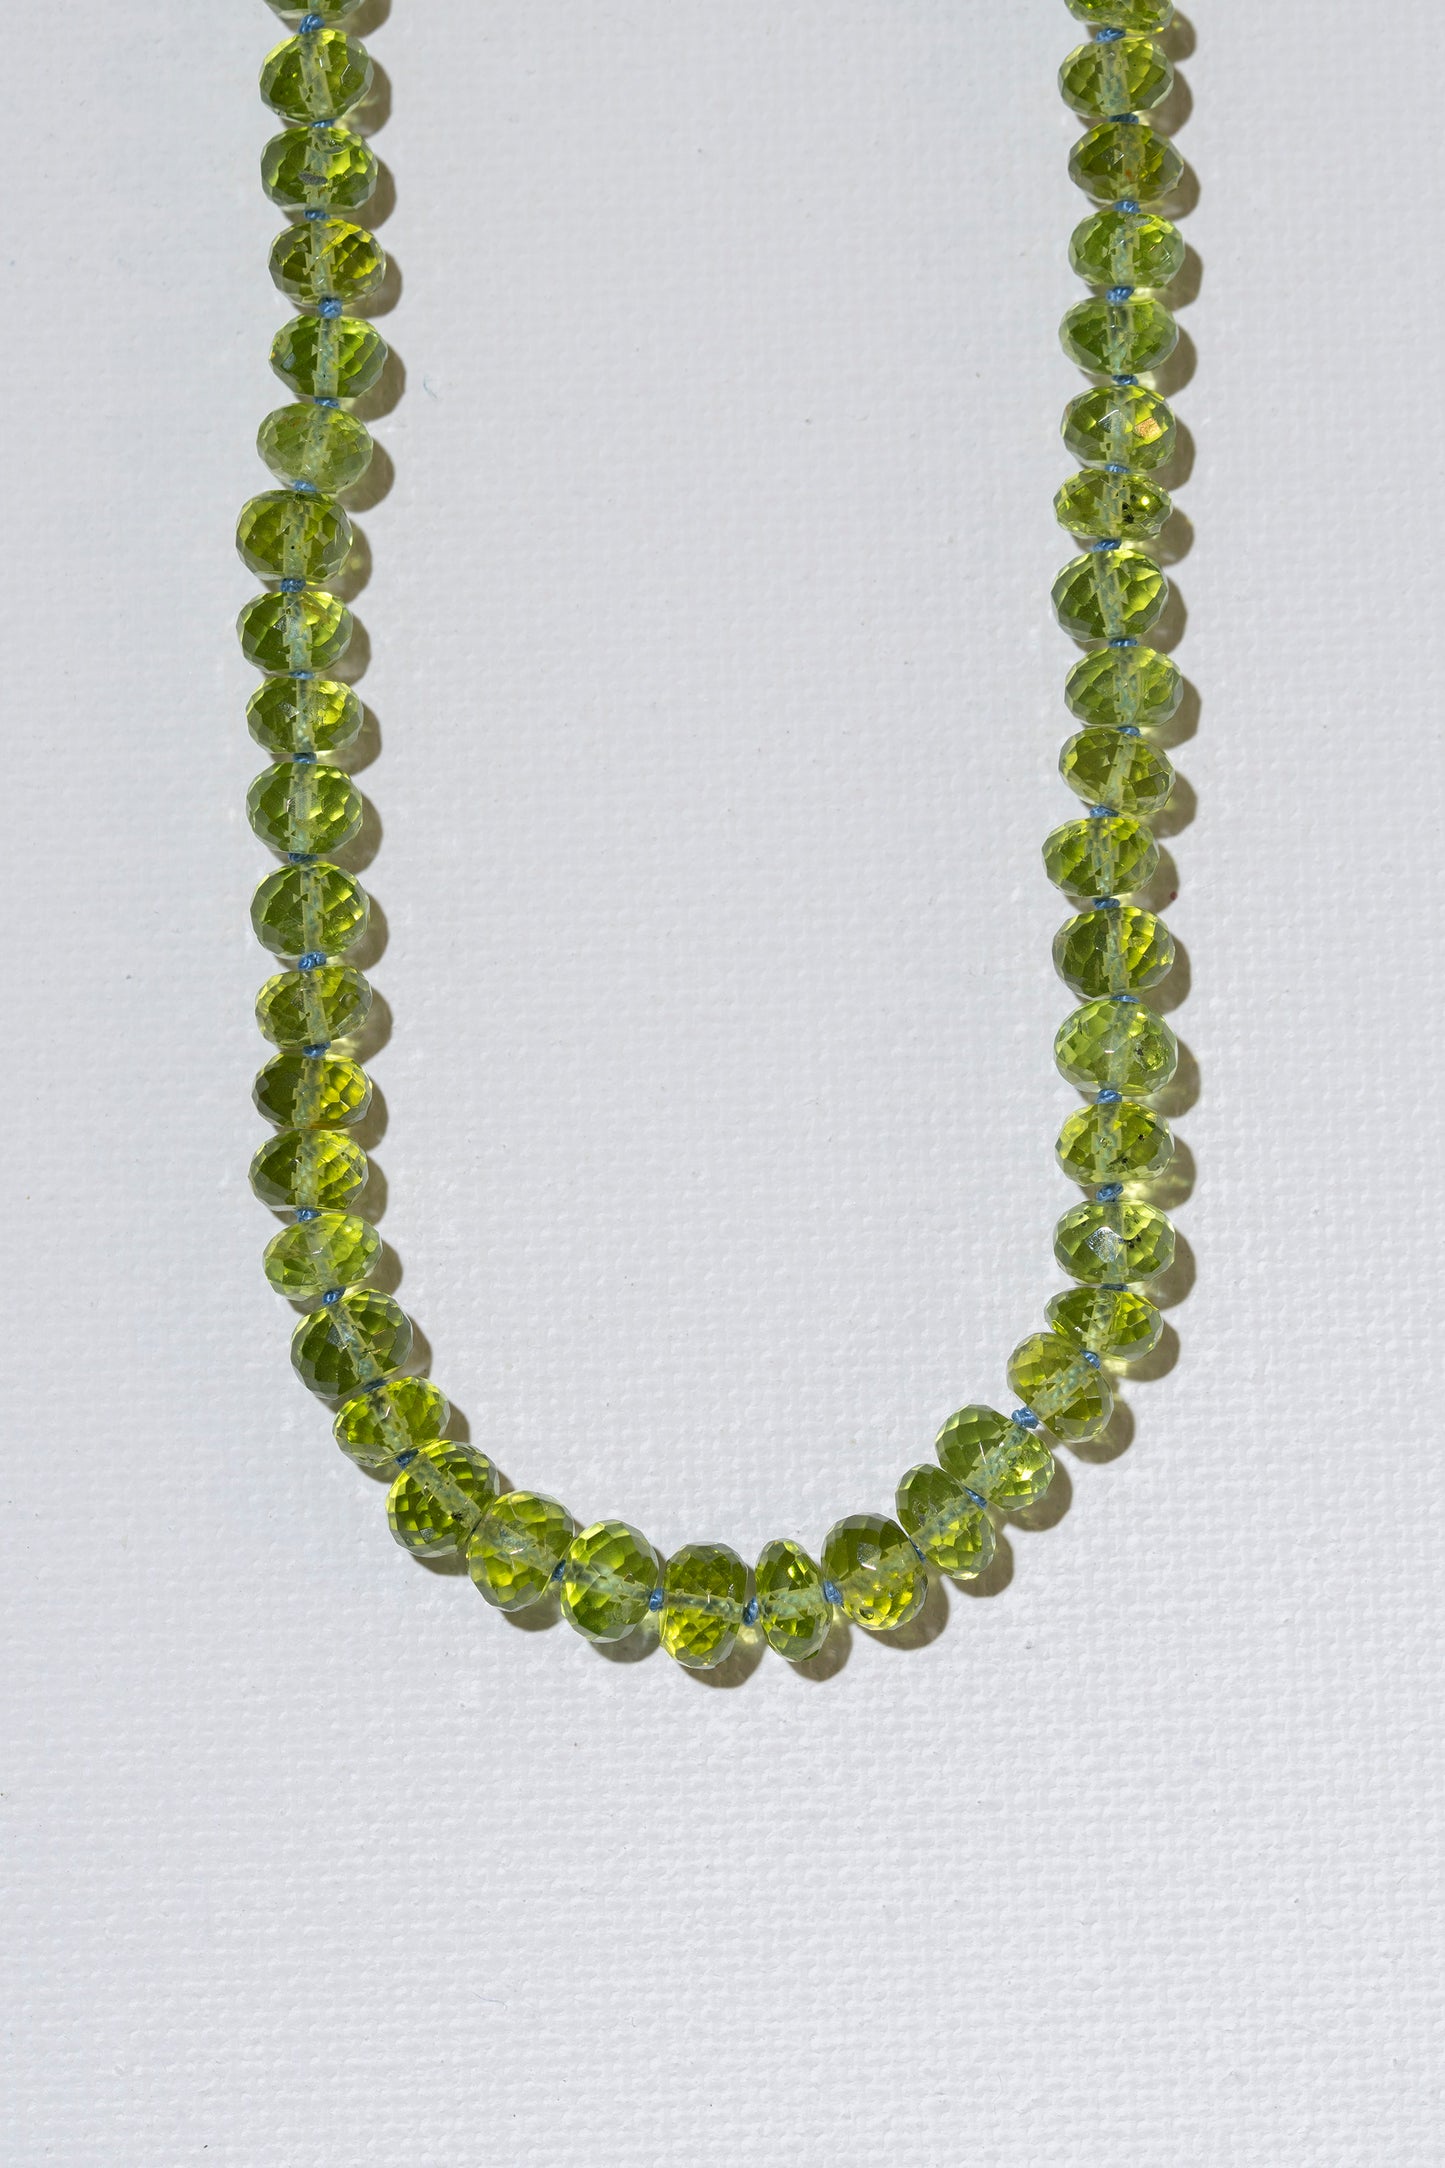 peridot green arizona afghani faceted knotted bead necklaces beaded jewelry 14k solid gold